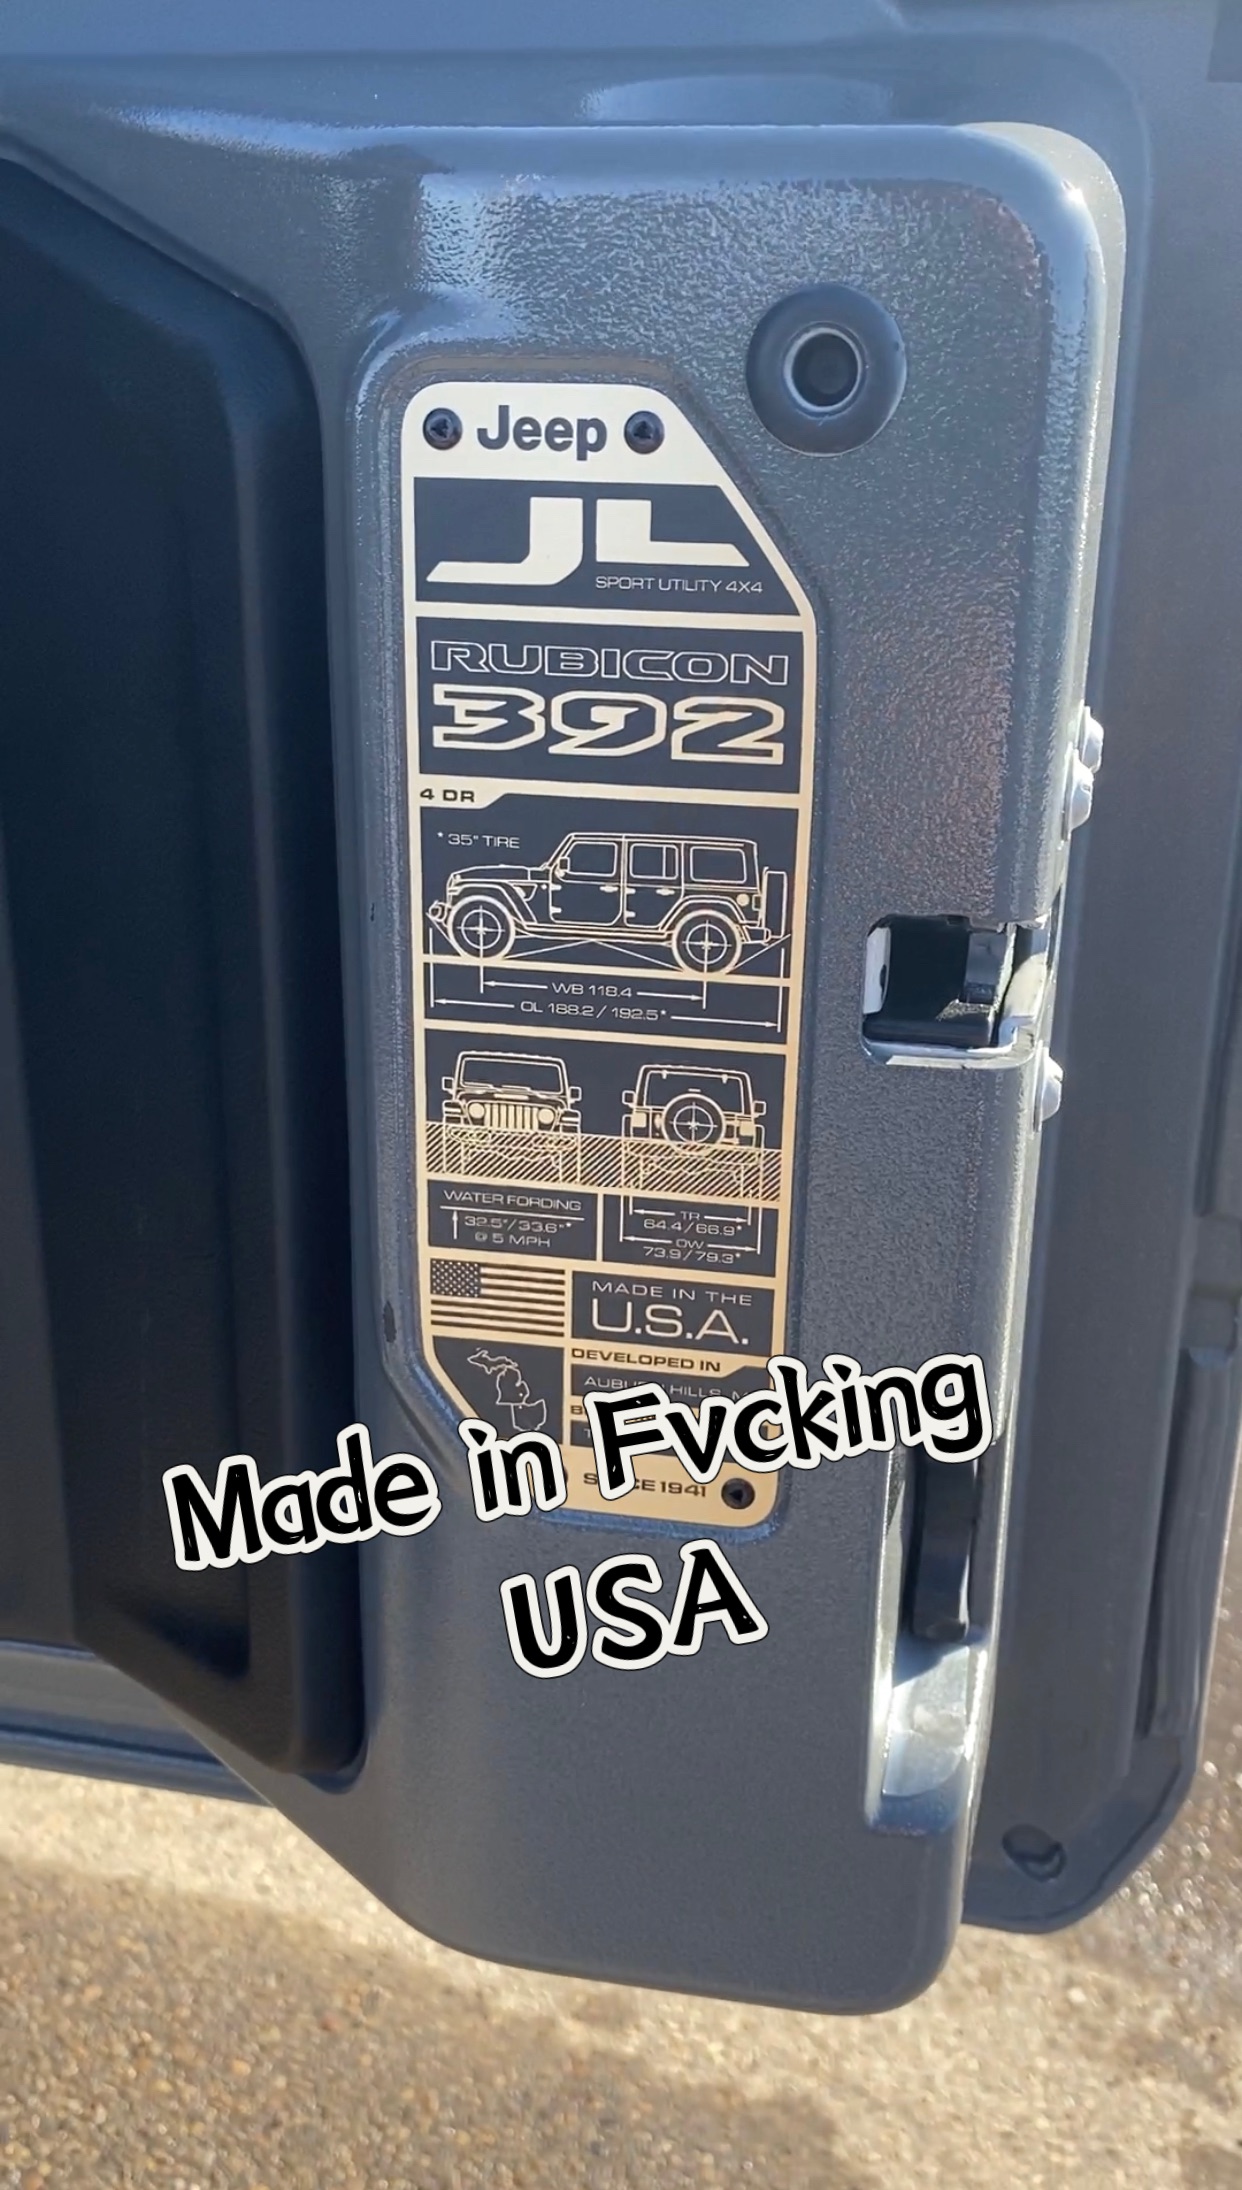 Made in Fvcking USA392